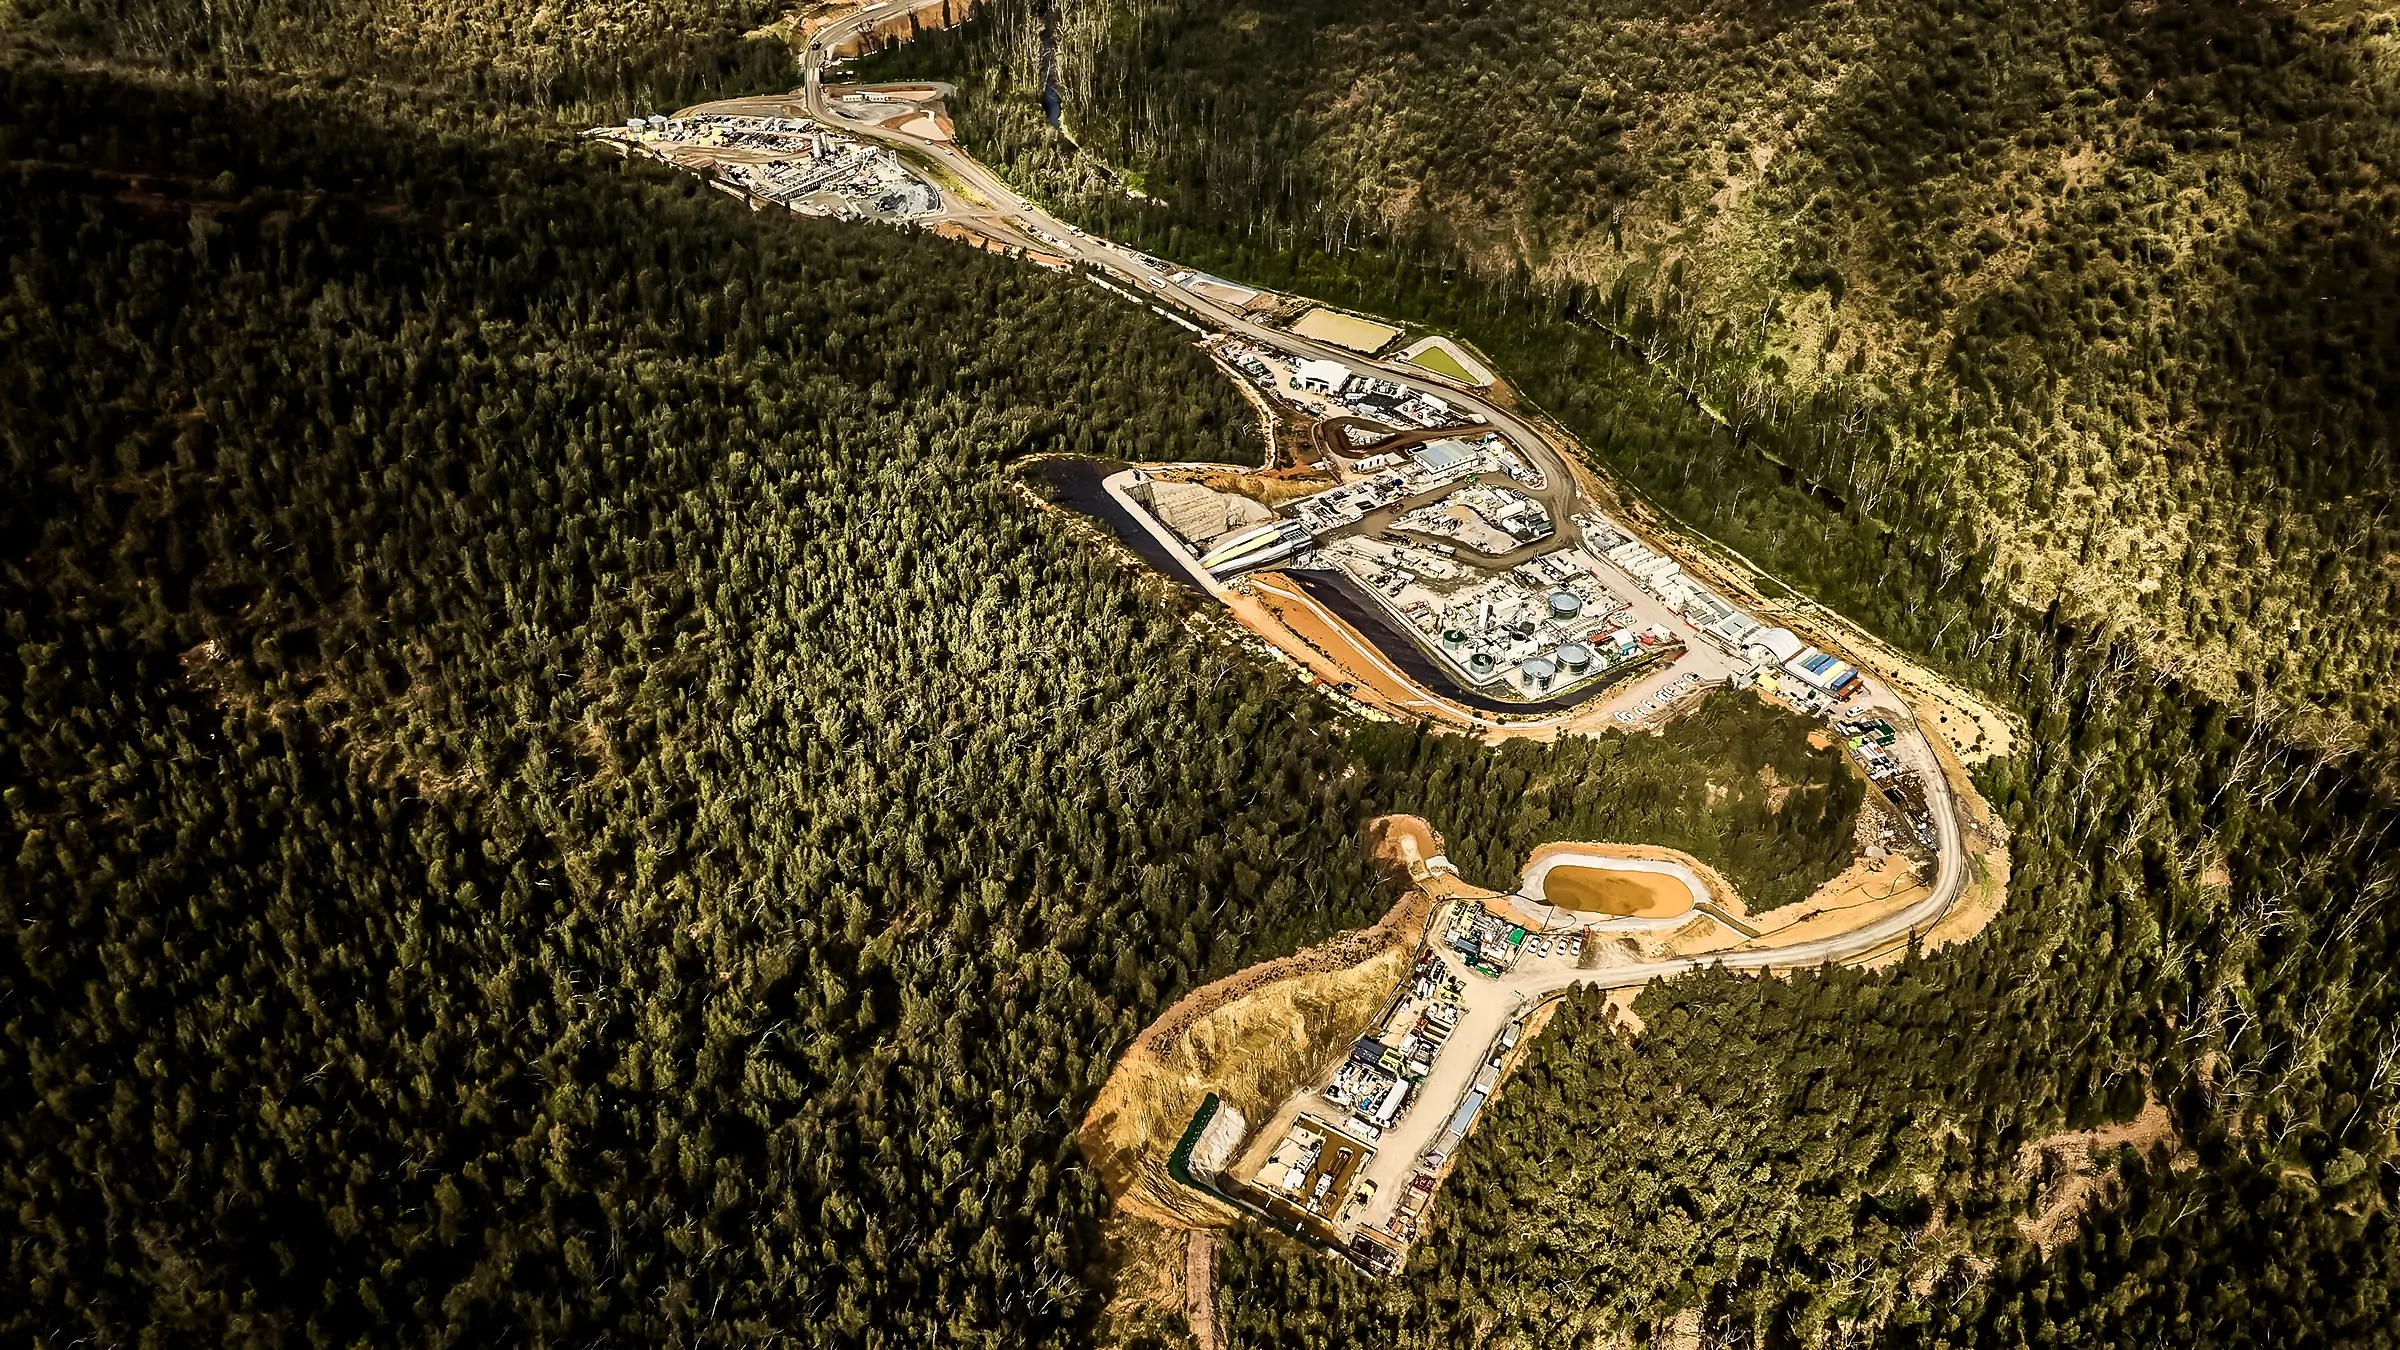 A large scale HDD project surrounded by rural forest in Australia.